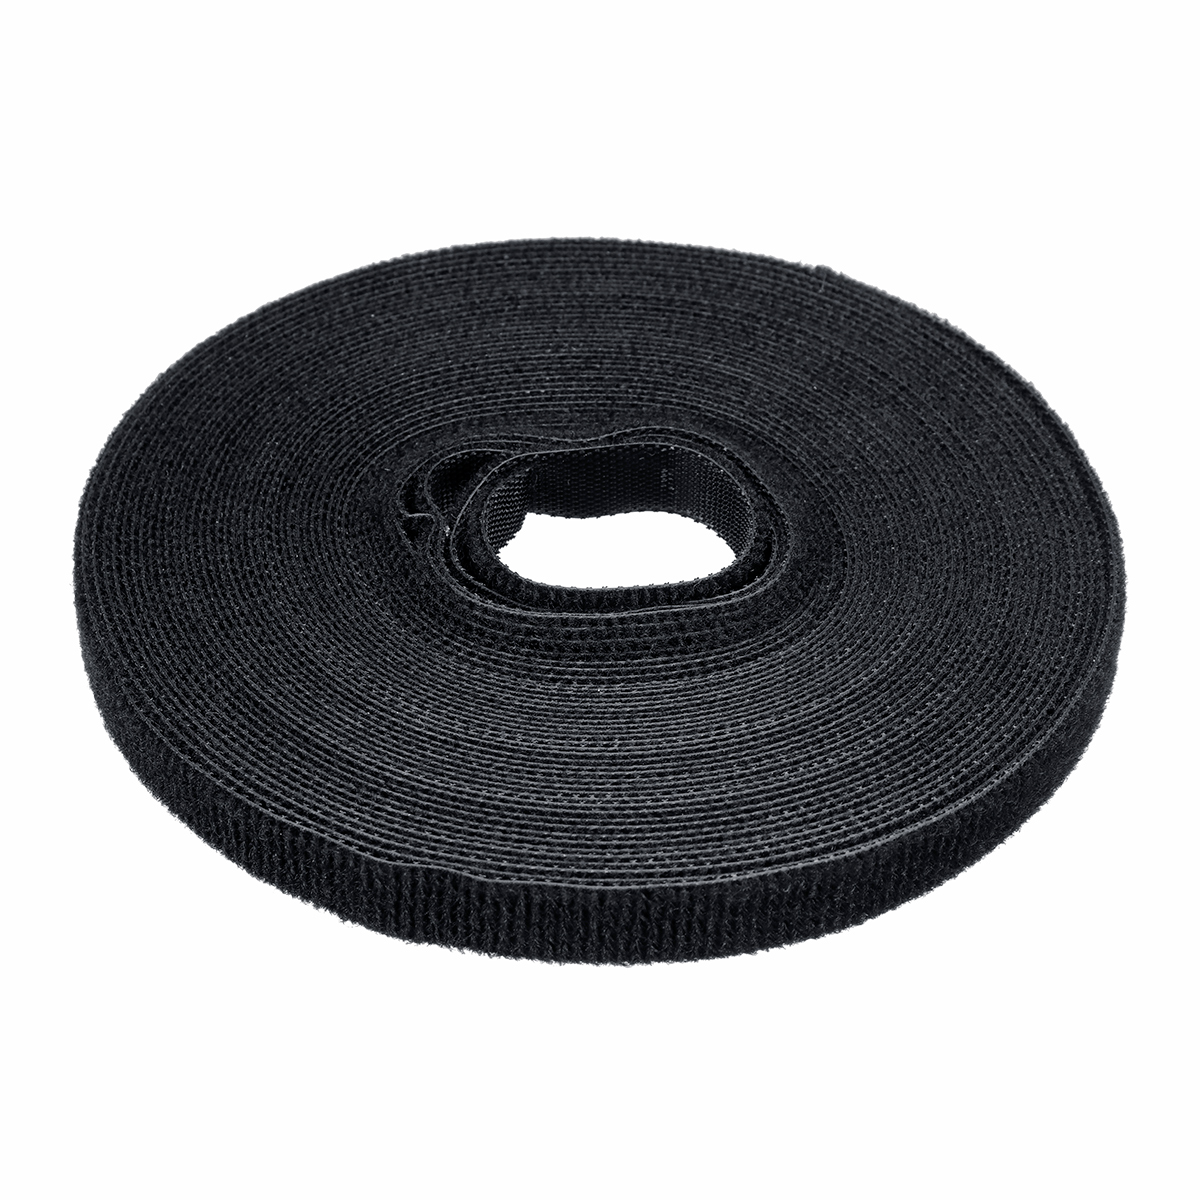 10m-Nylon-Cable-Ties-Wrap-Ties-Fastening-Cables-Wire-Cable-Line-Holder-Winder-Clip-1558531-9